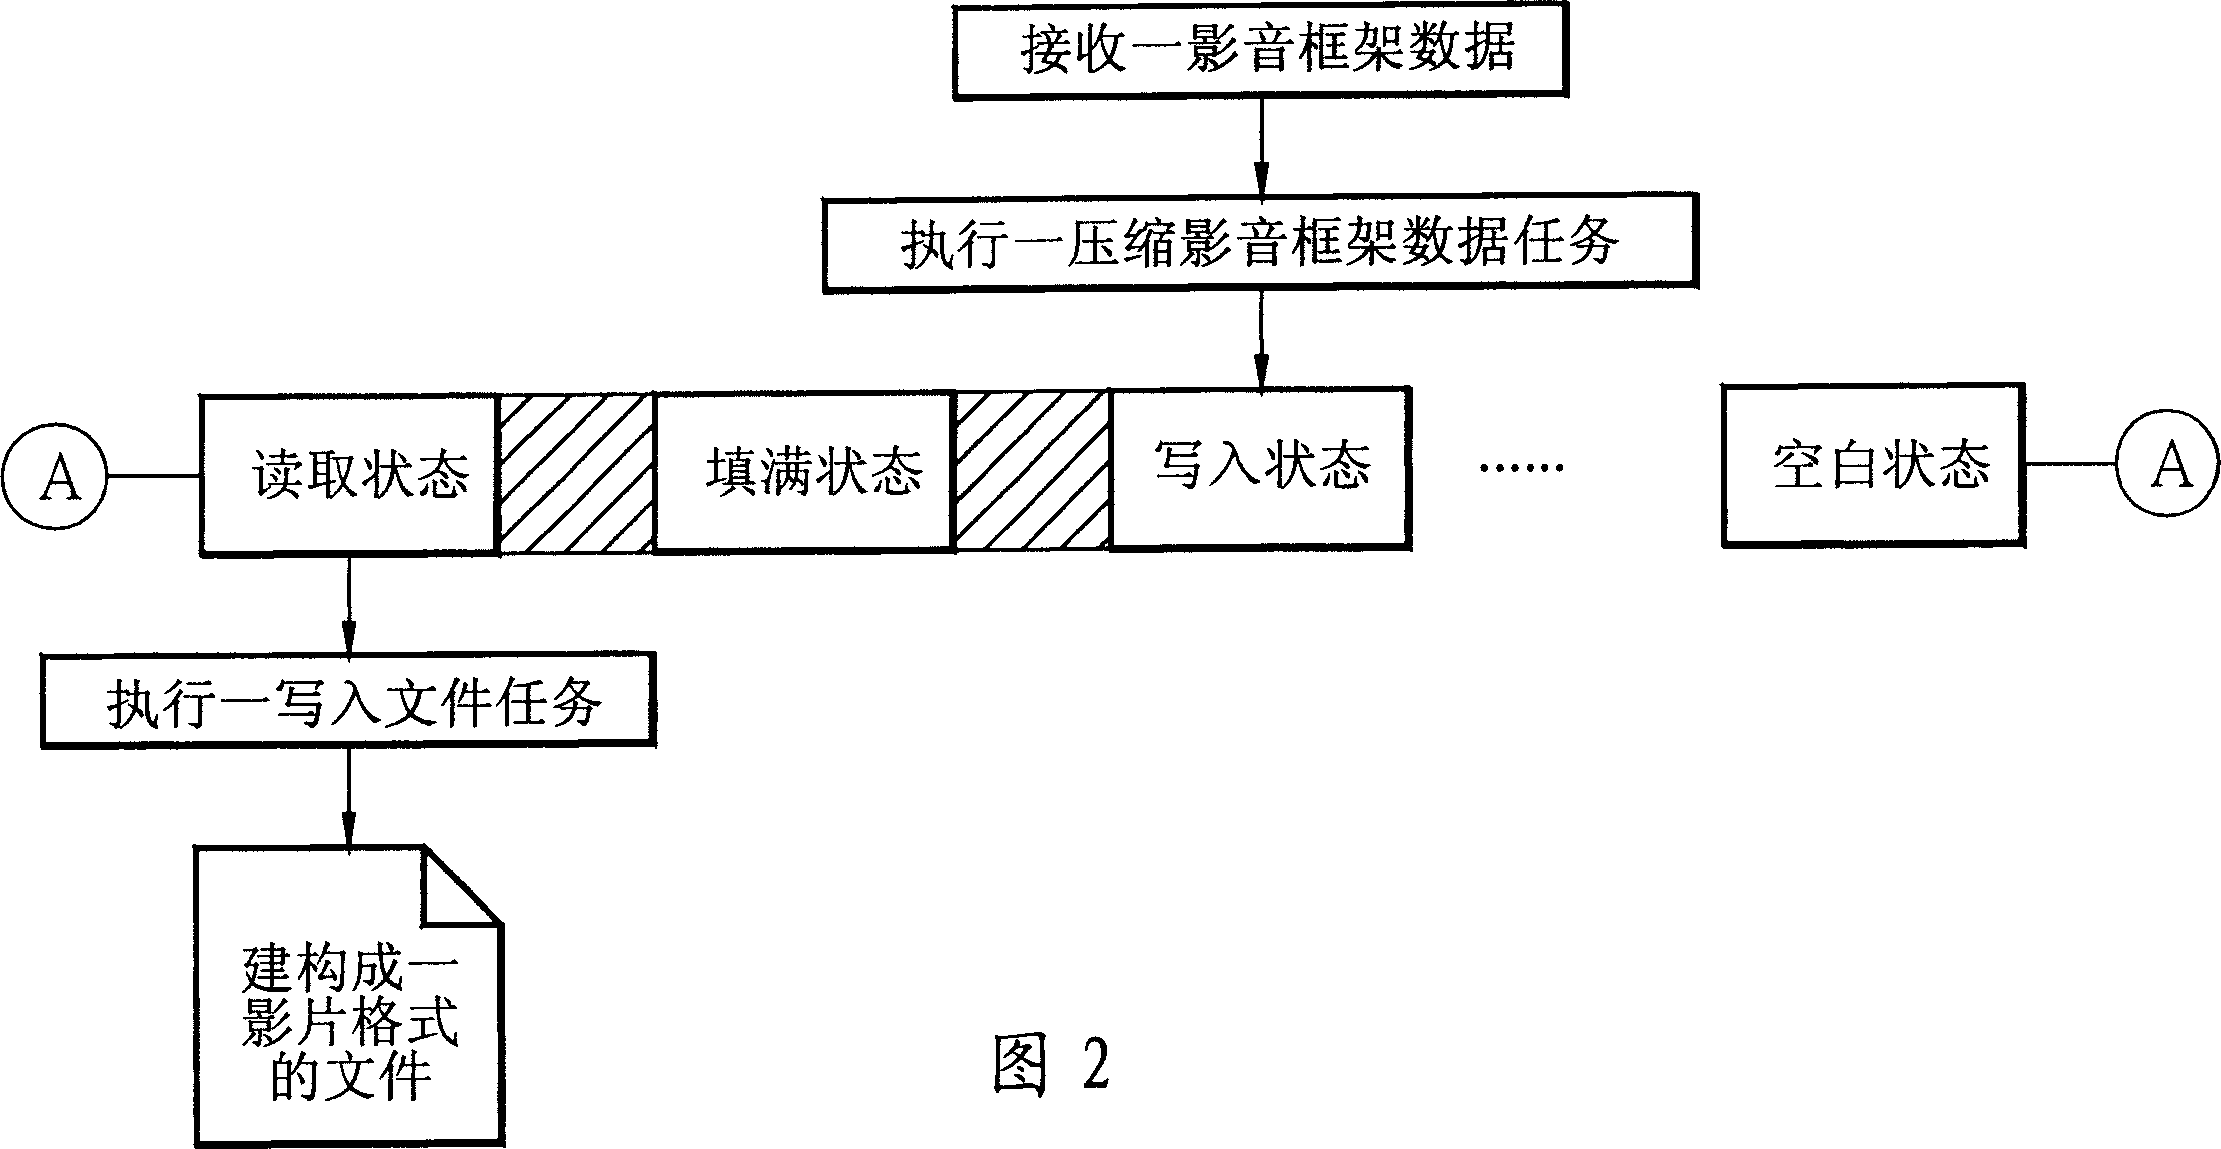 Multi-layer architecture unit, operation method and compression method for recording video and audio frame data